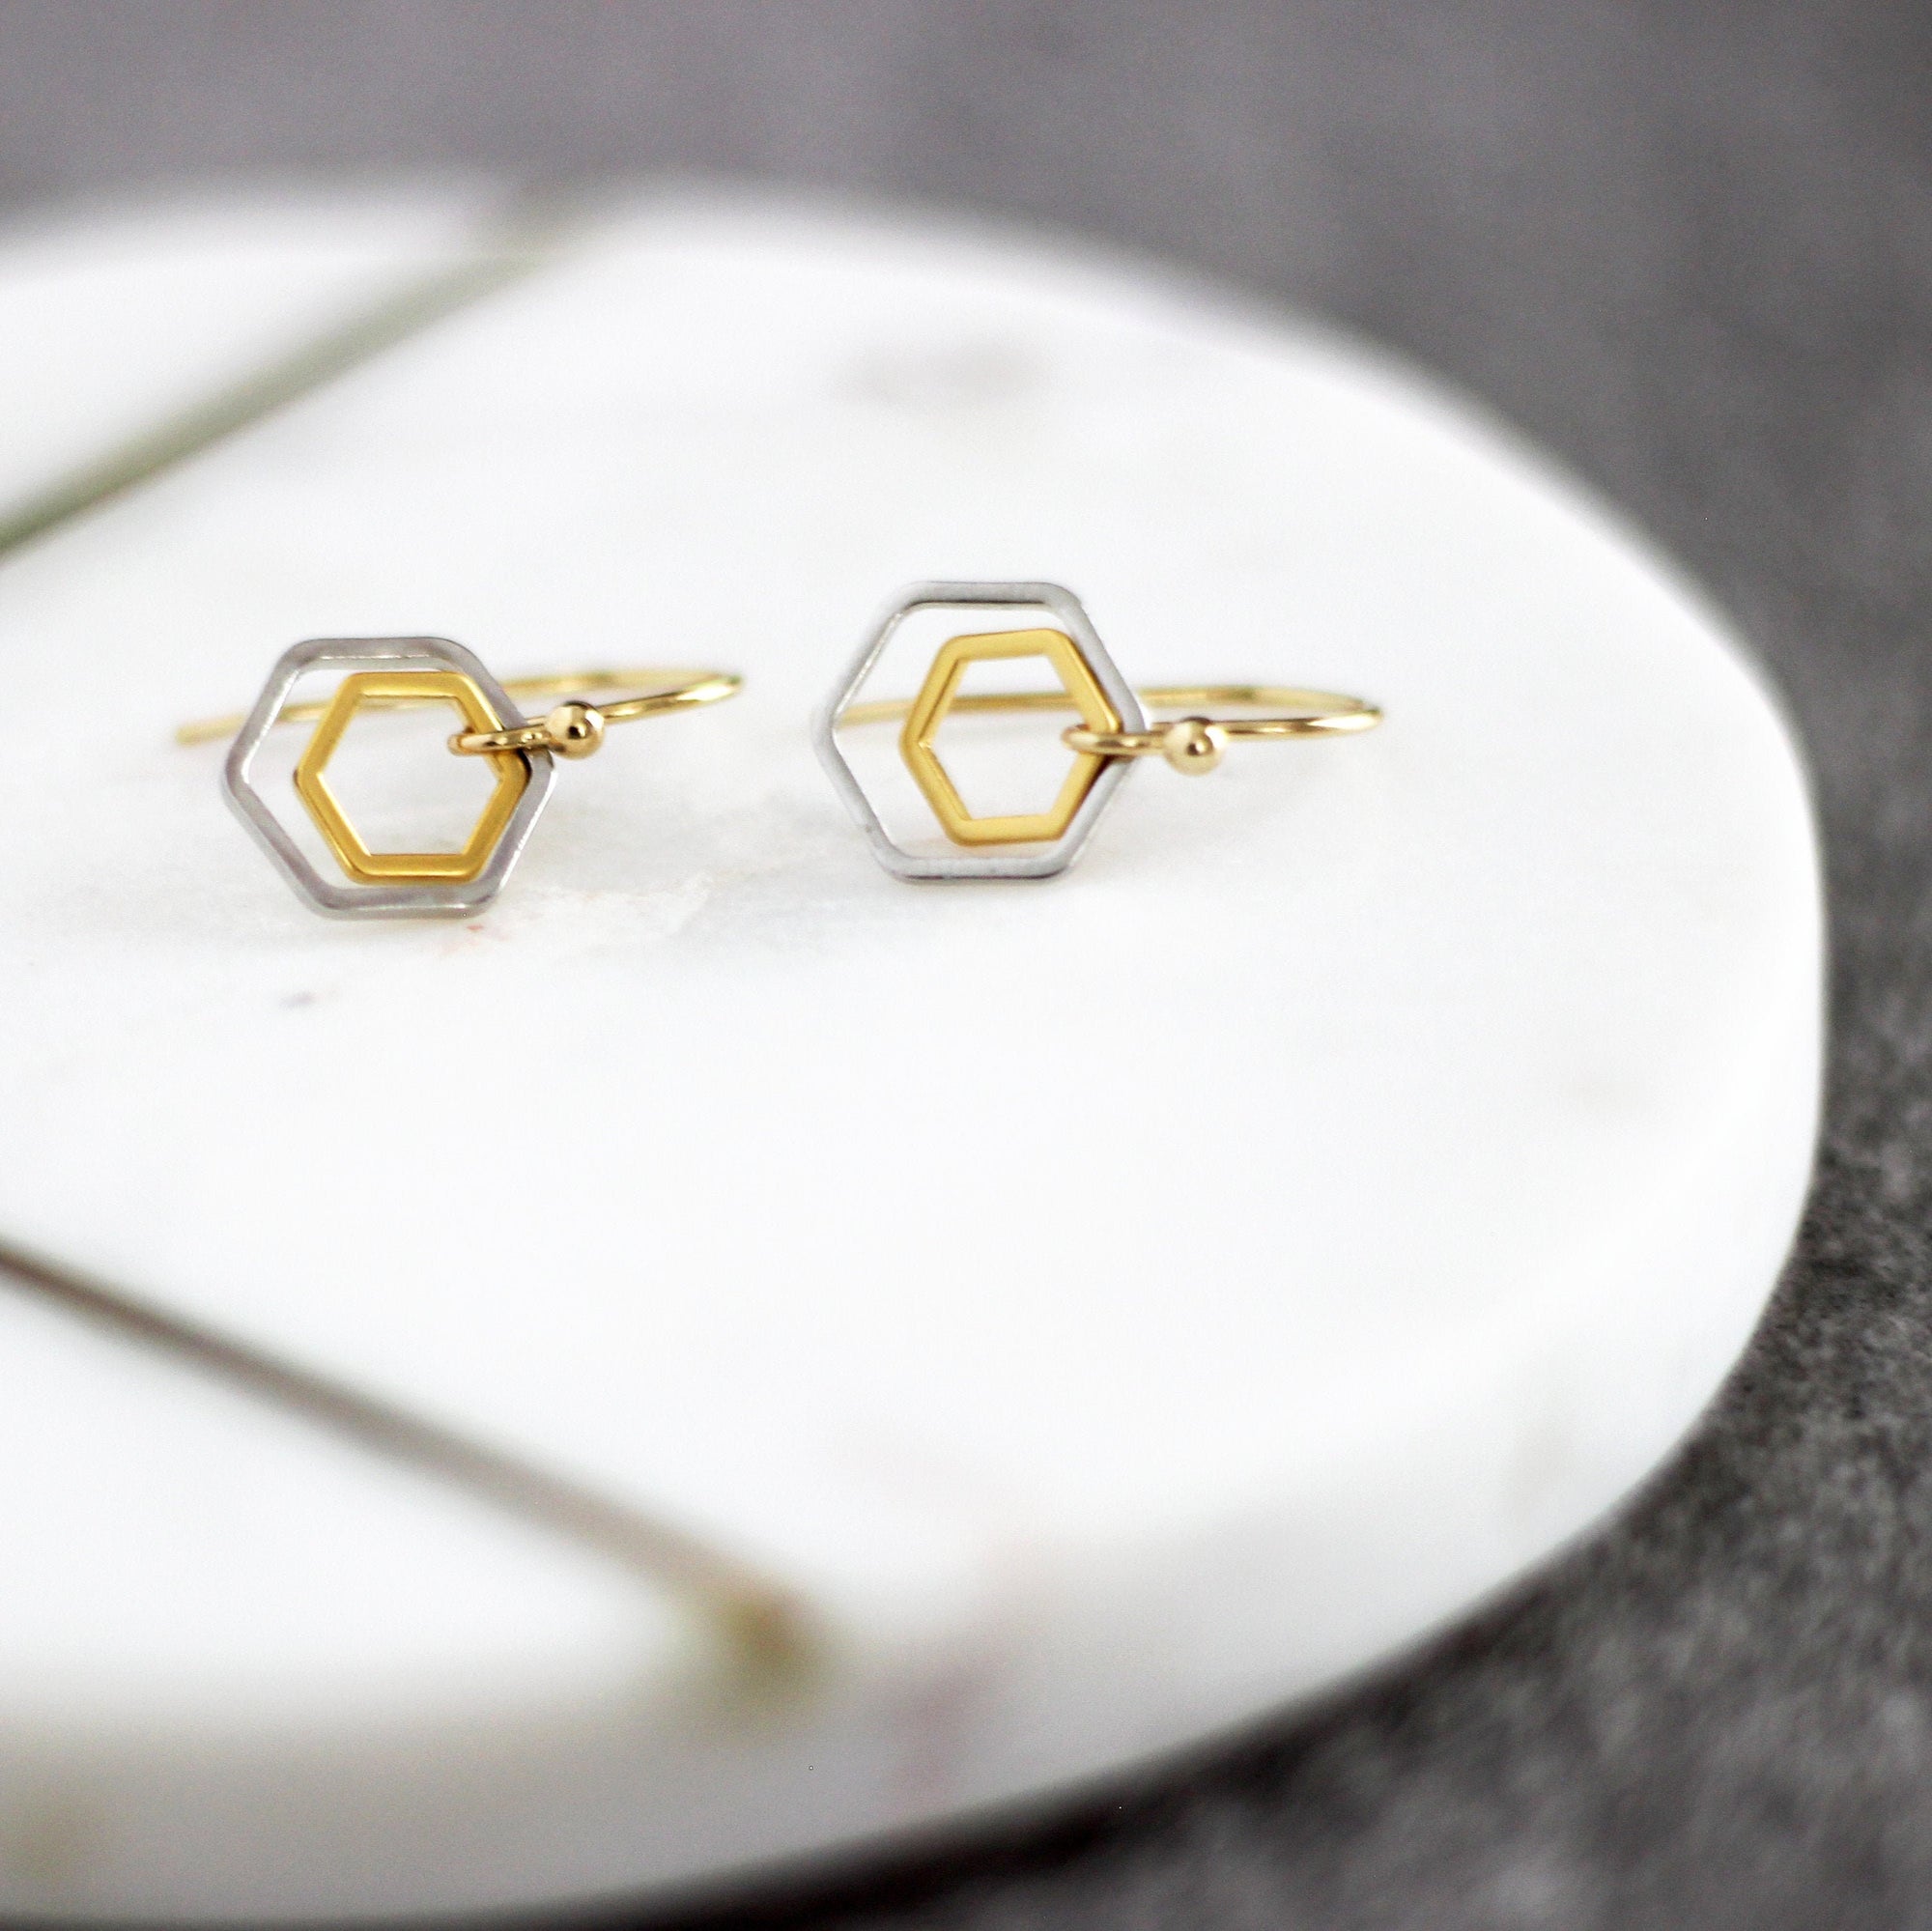 "Le Contour" Silver and Matte Gold Tiny Hoop Mixed Metal Earrings